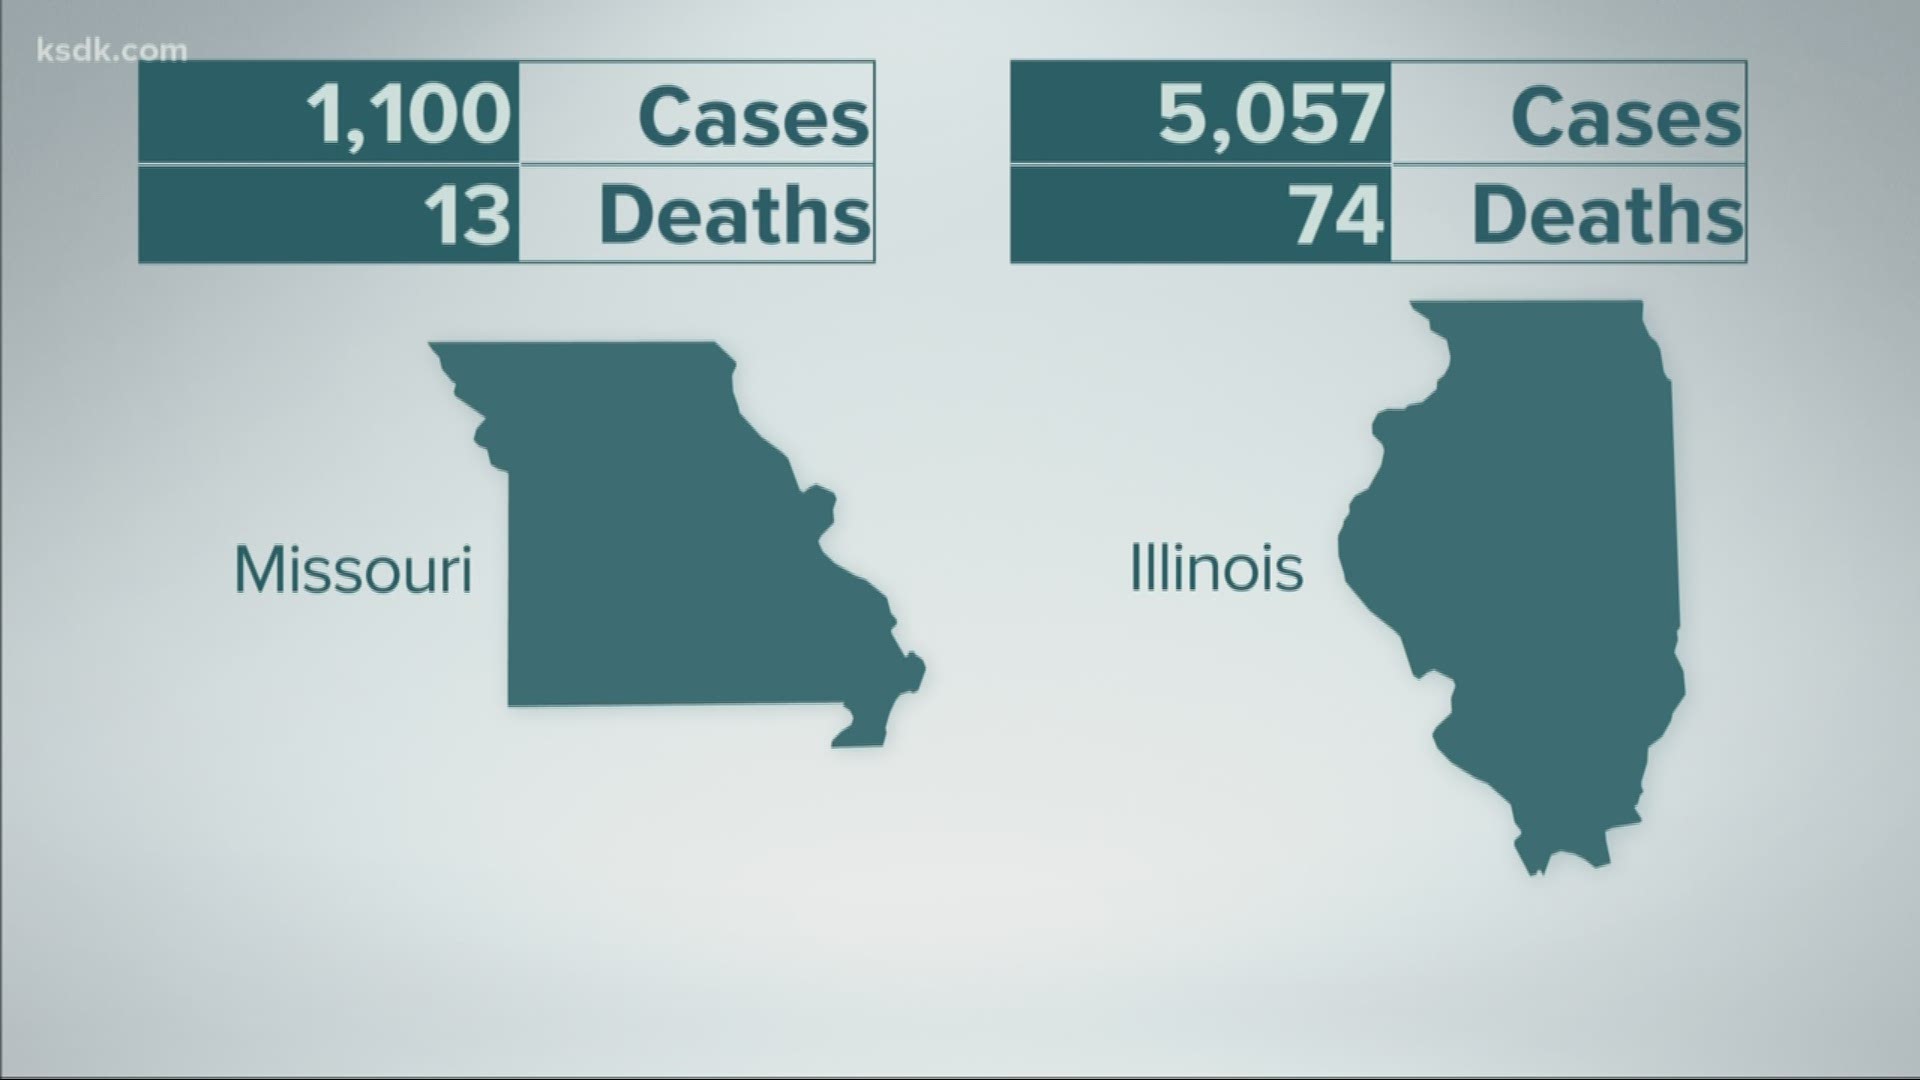 5 On Your Side has the latest on the deaths and confirmed COVID-19 cases in Missouri and Illinois.